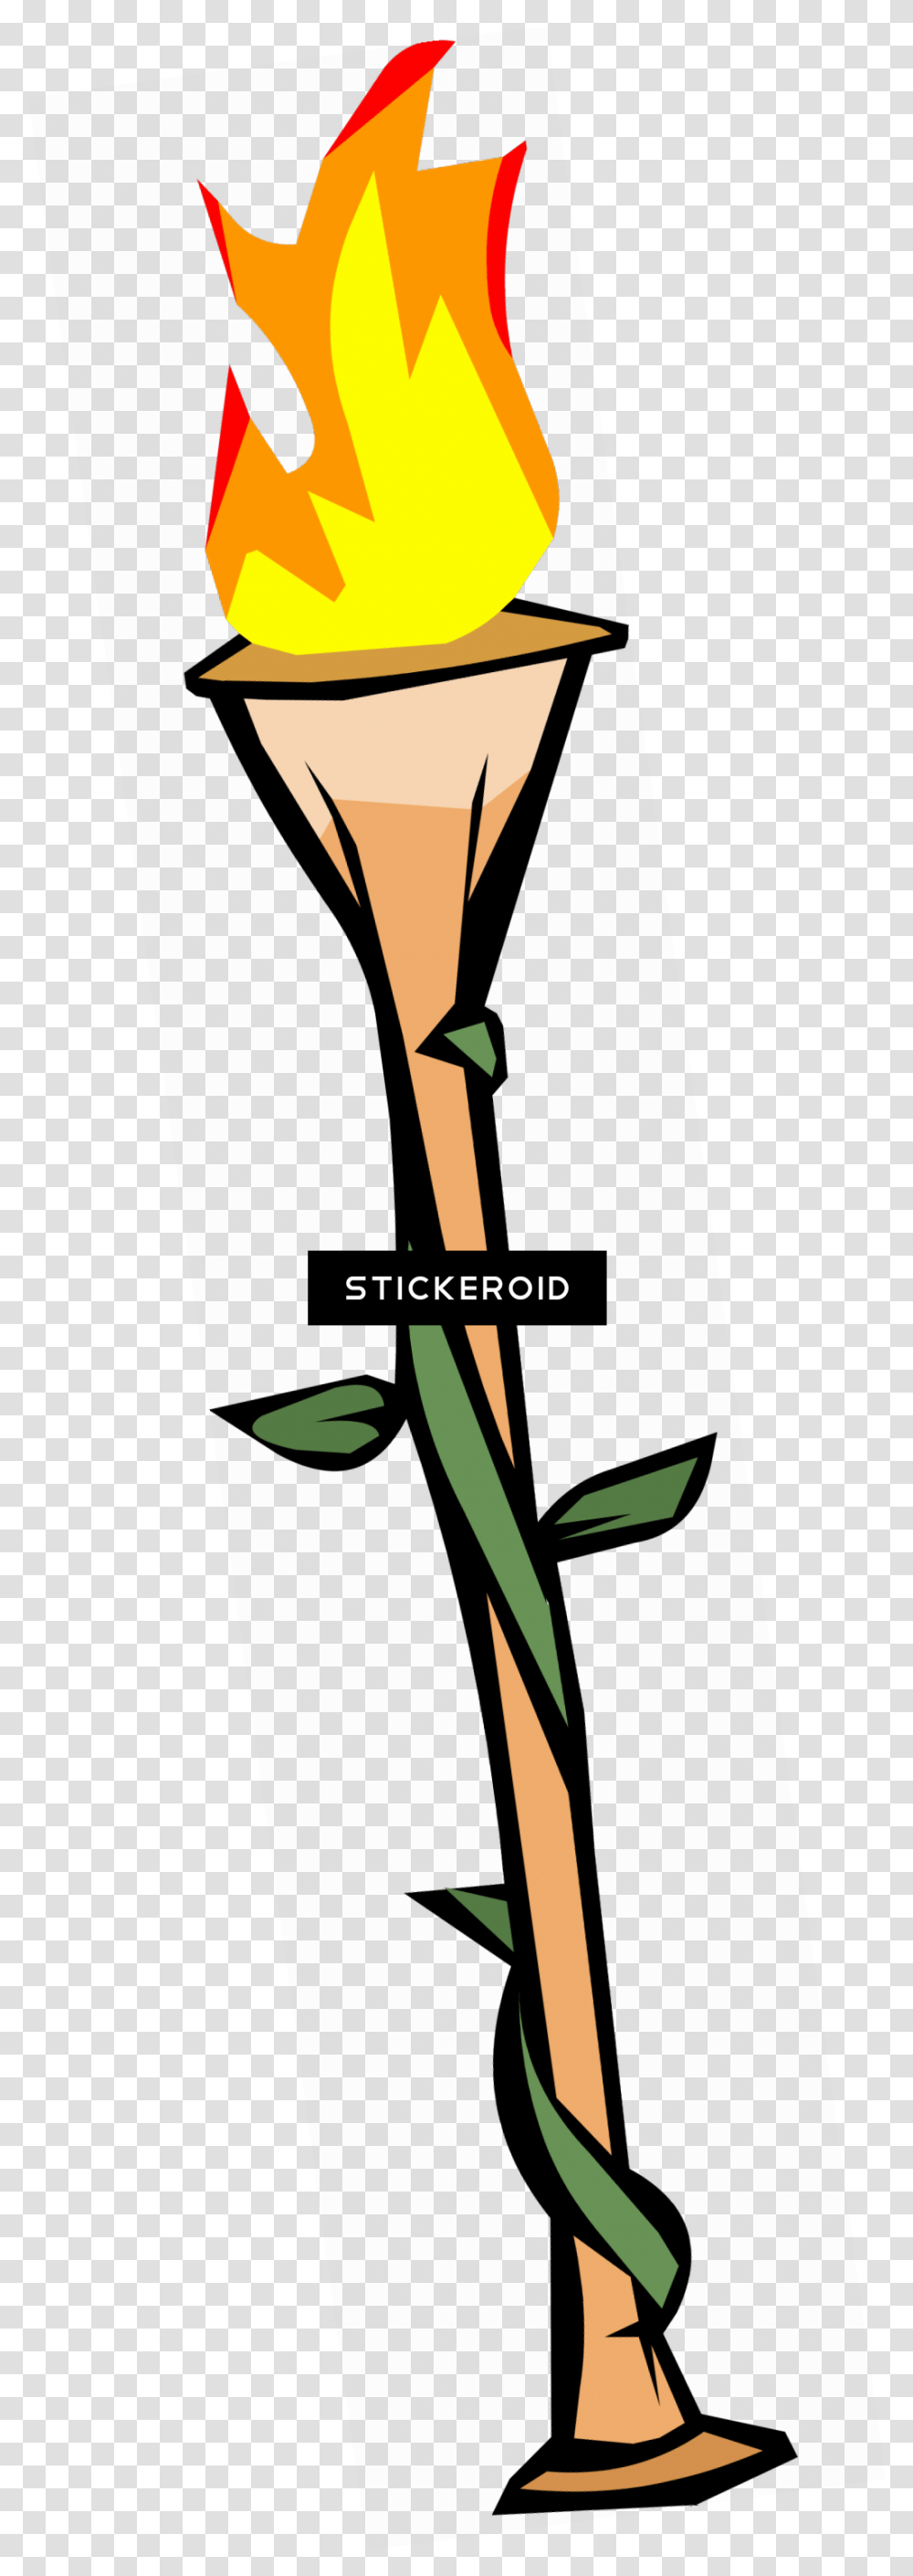 Background Tiki Torch Tiki Torch Clipart, Plant, Flower, Tree, Sprout Transparent Png